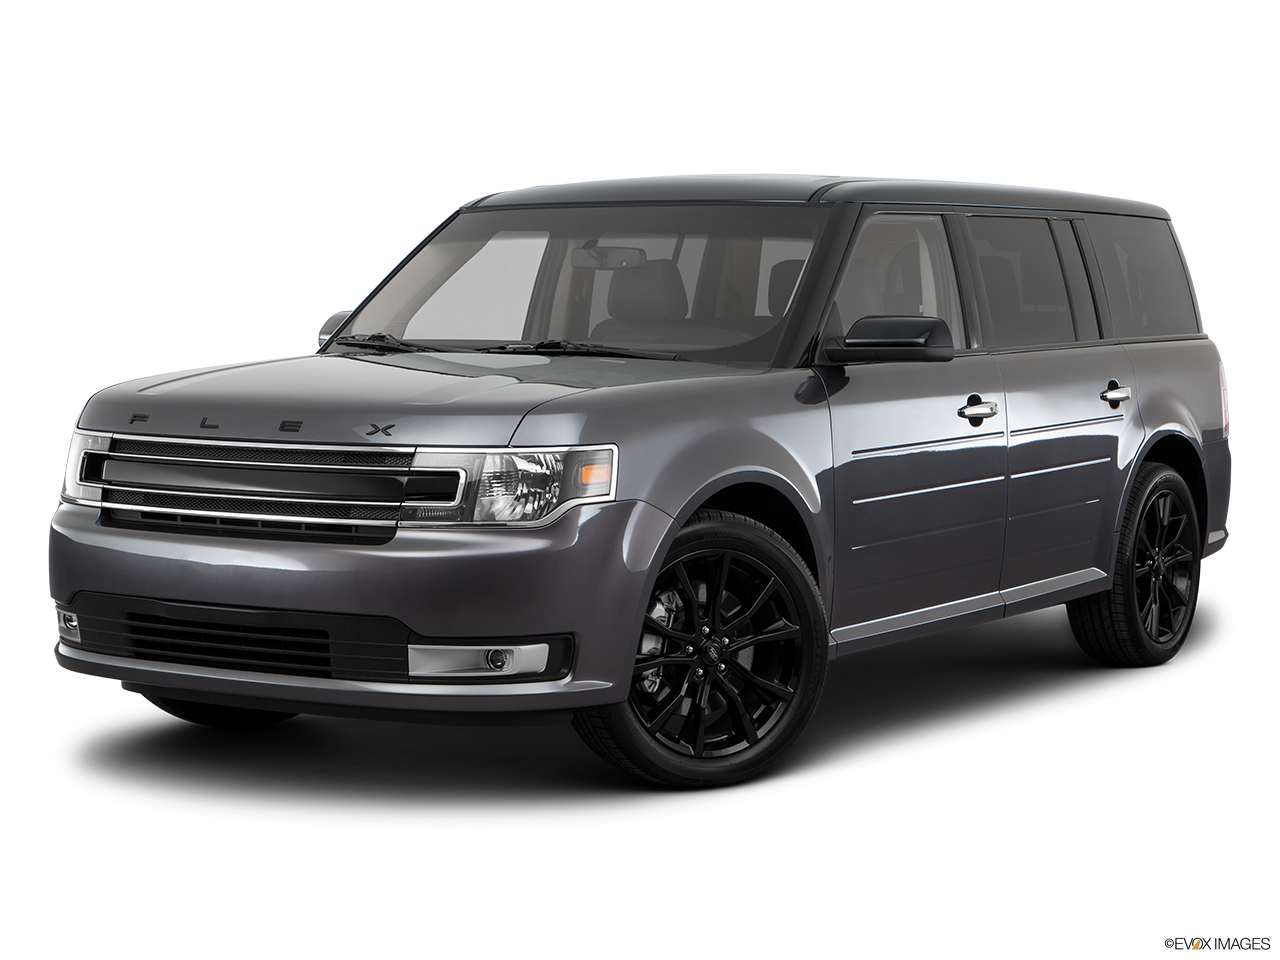 Ford Flex Wallpapers Vehicles Hq Ford Flex Pictures 4k Wallpapers 2019